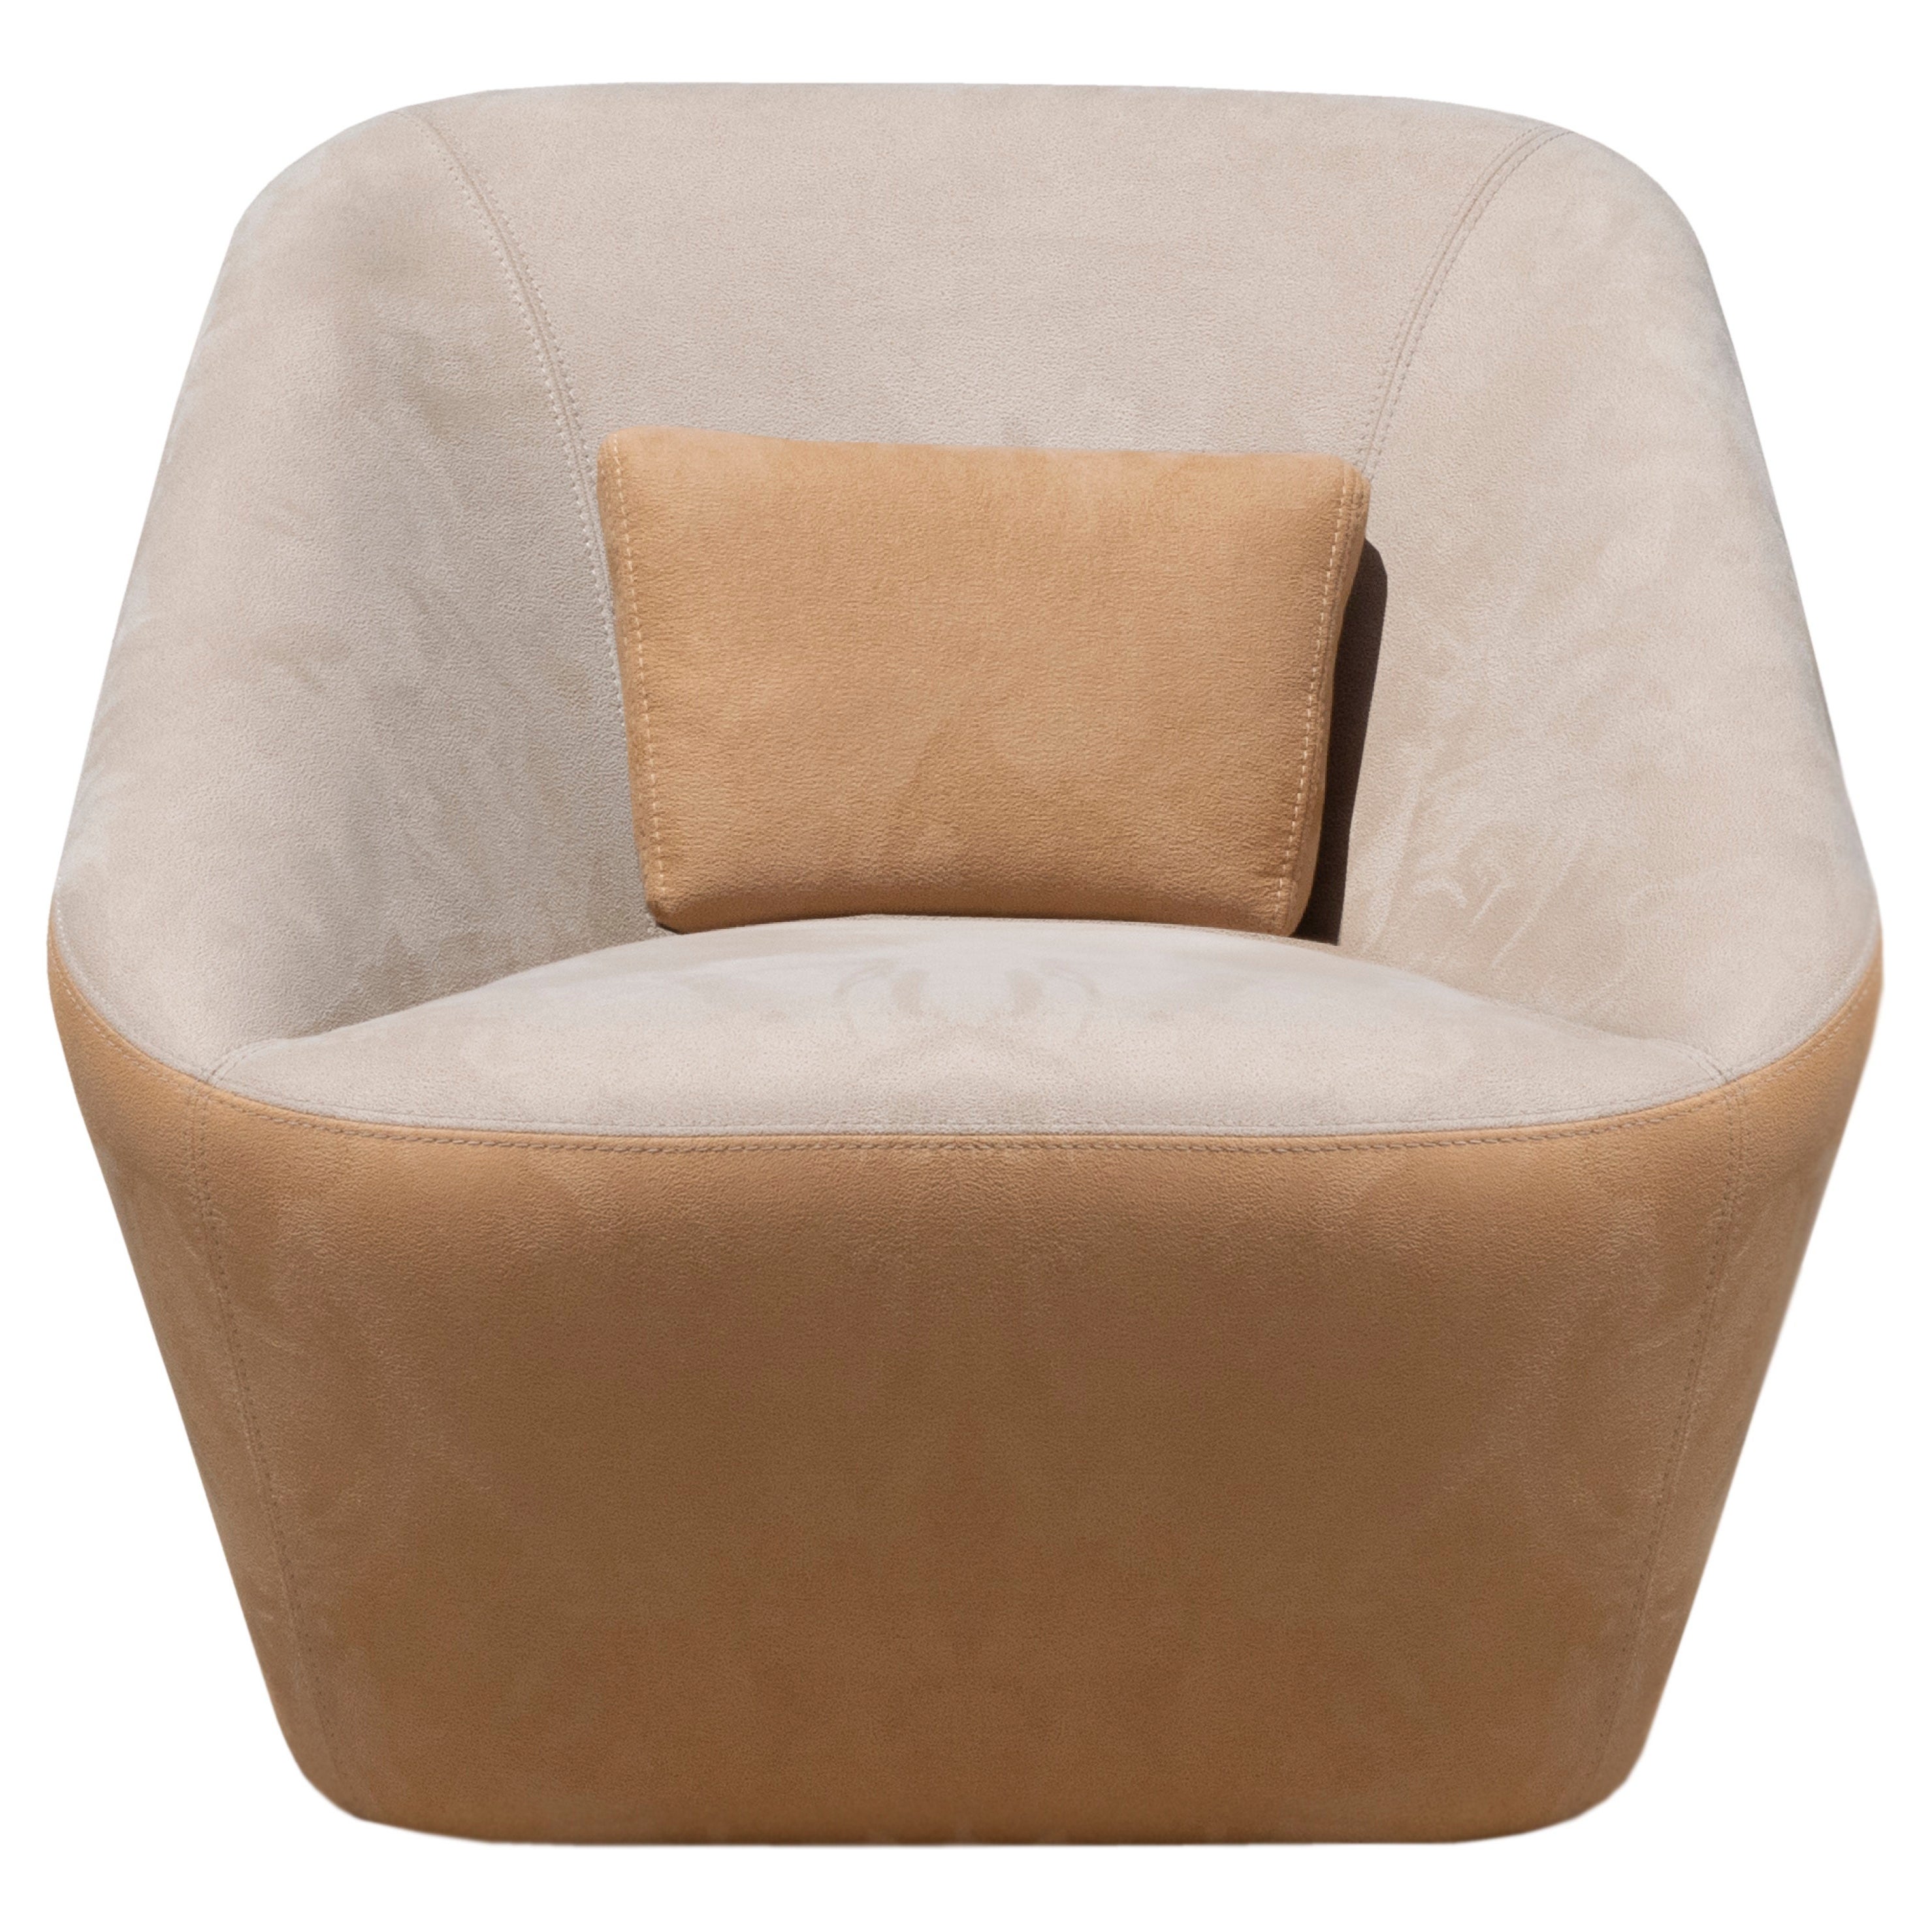 Prince Spencer Armchair with Two-Tone (Beige-Orange) Fabric Upholstery For Sale